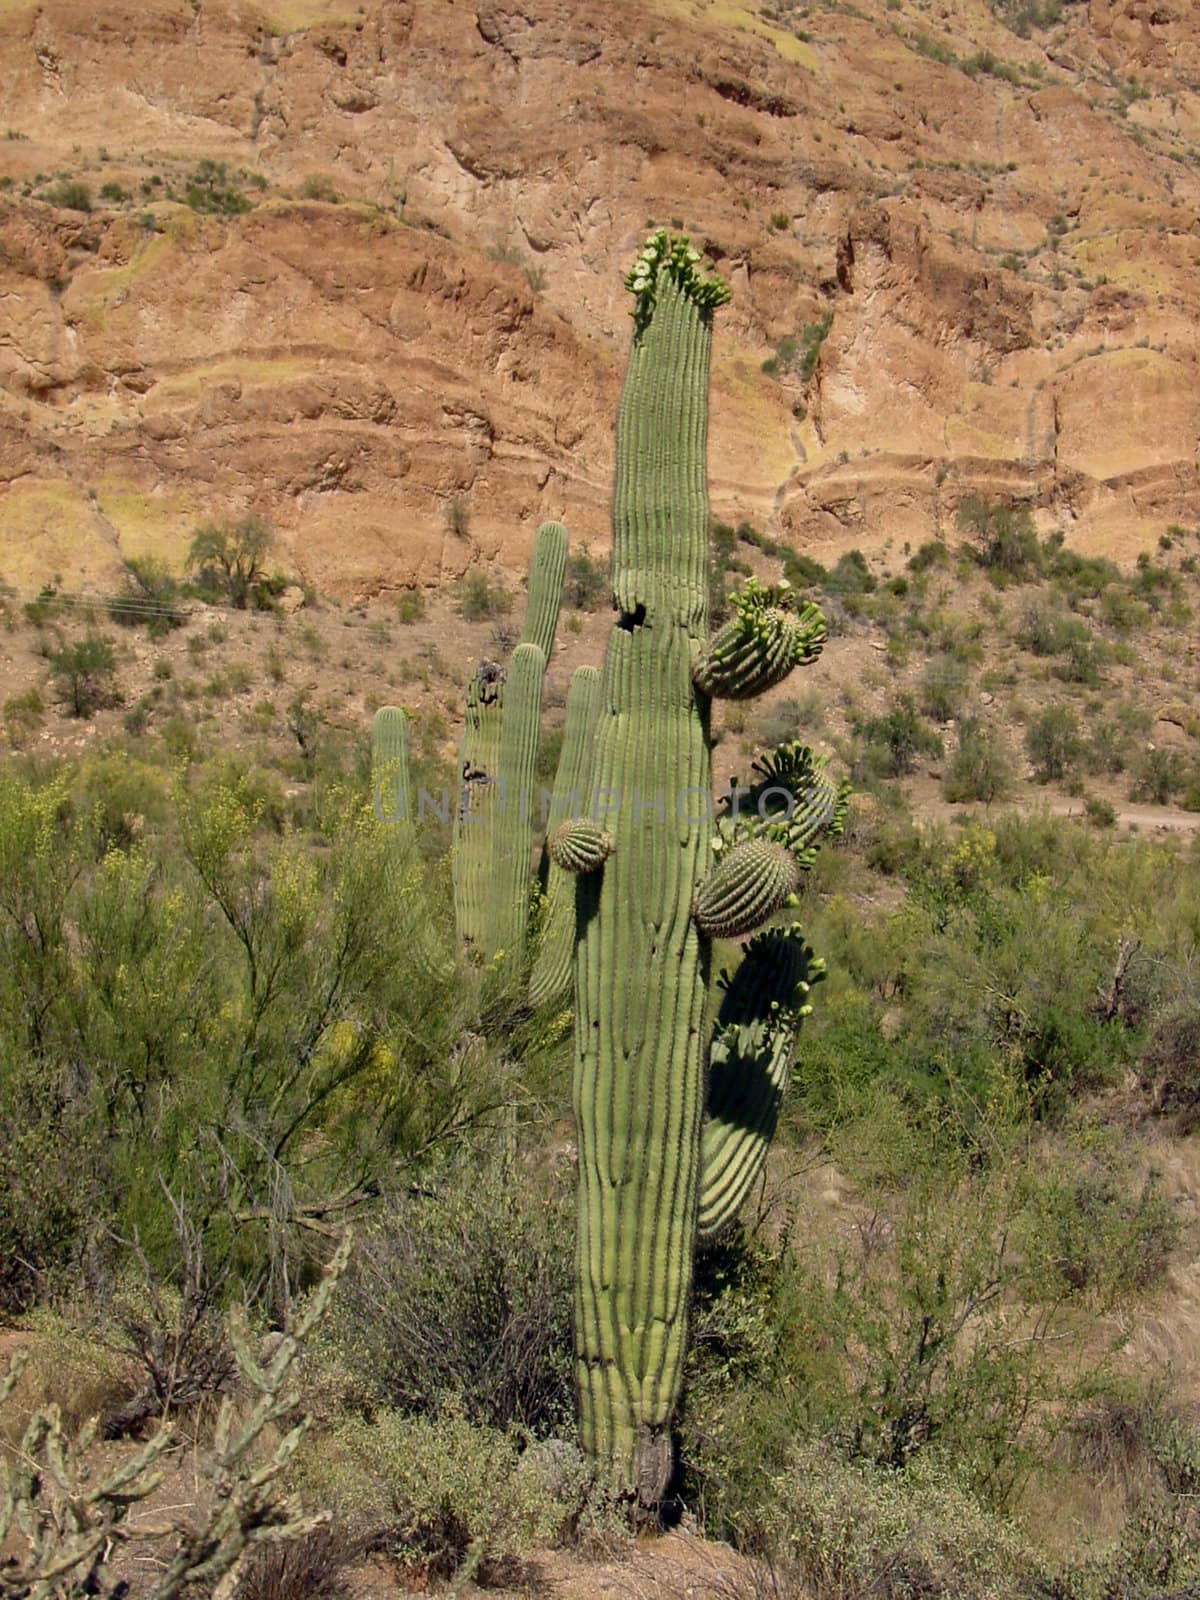 This is a picture of a cactus plant in the dry Arizona desert.